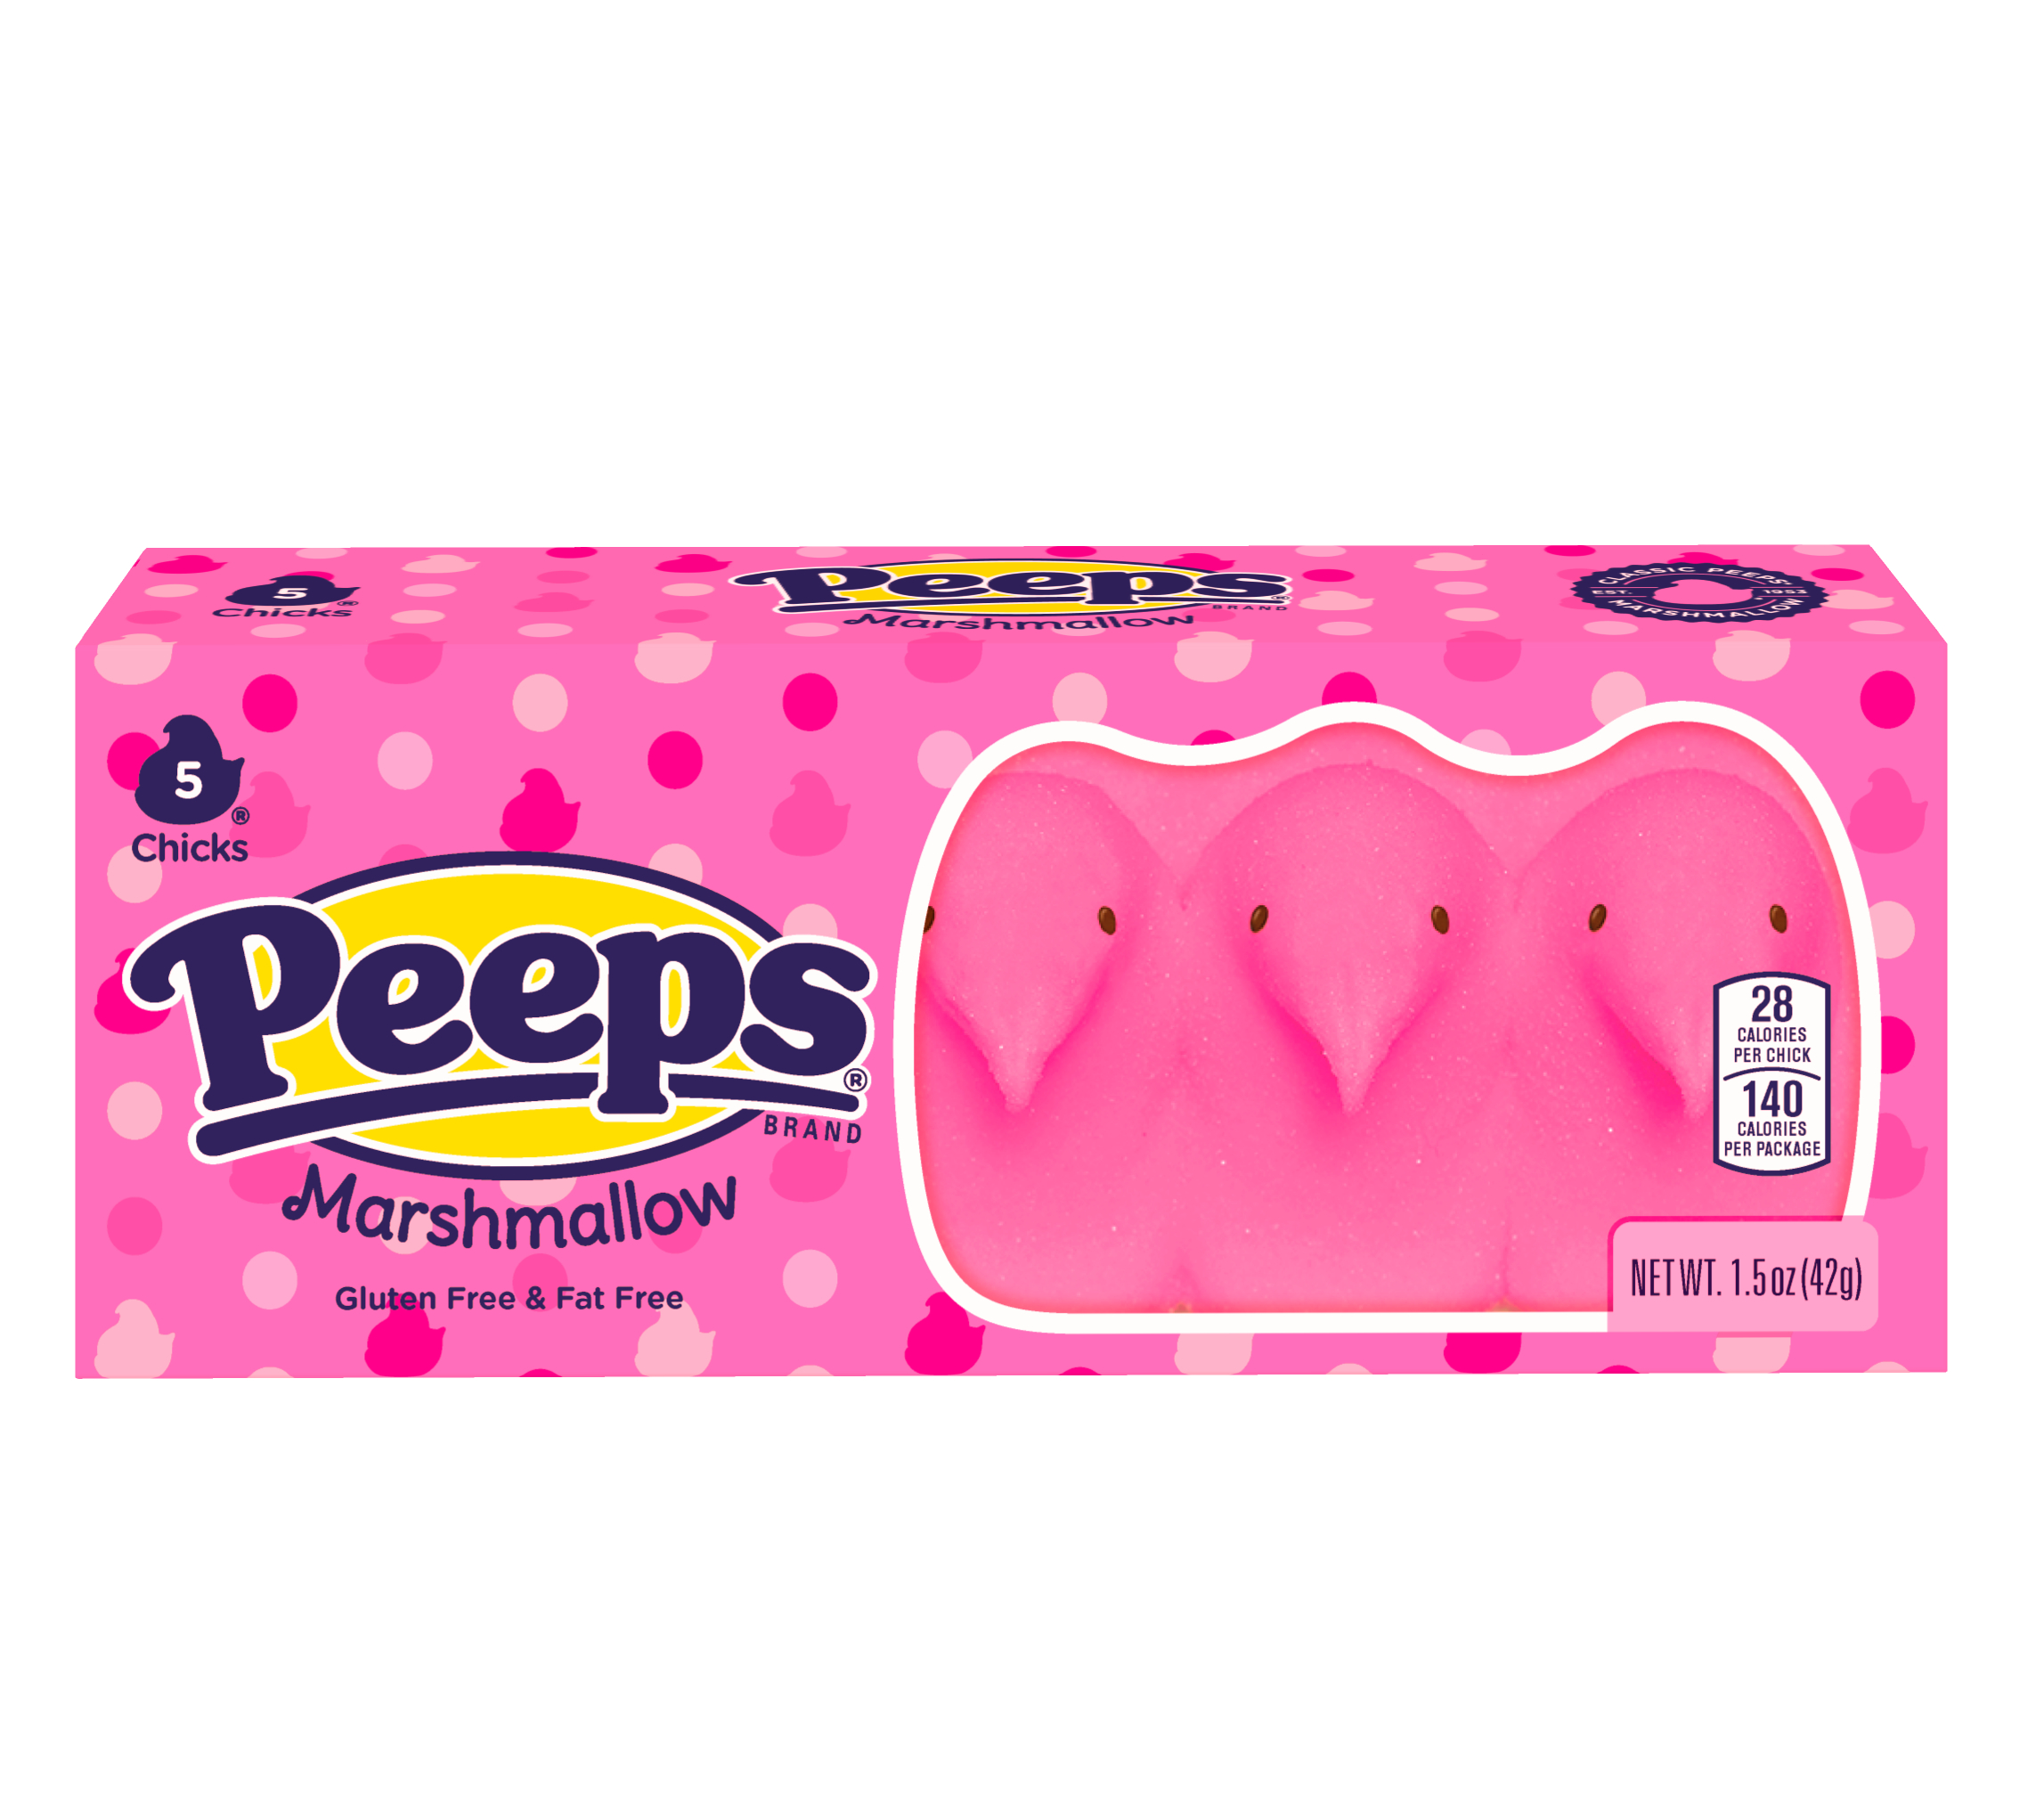 A close-up of the Peeps packaging